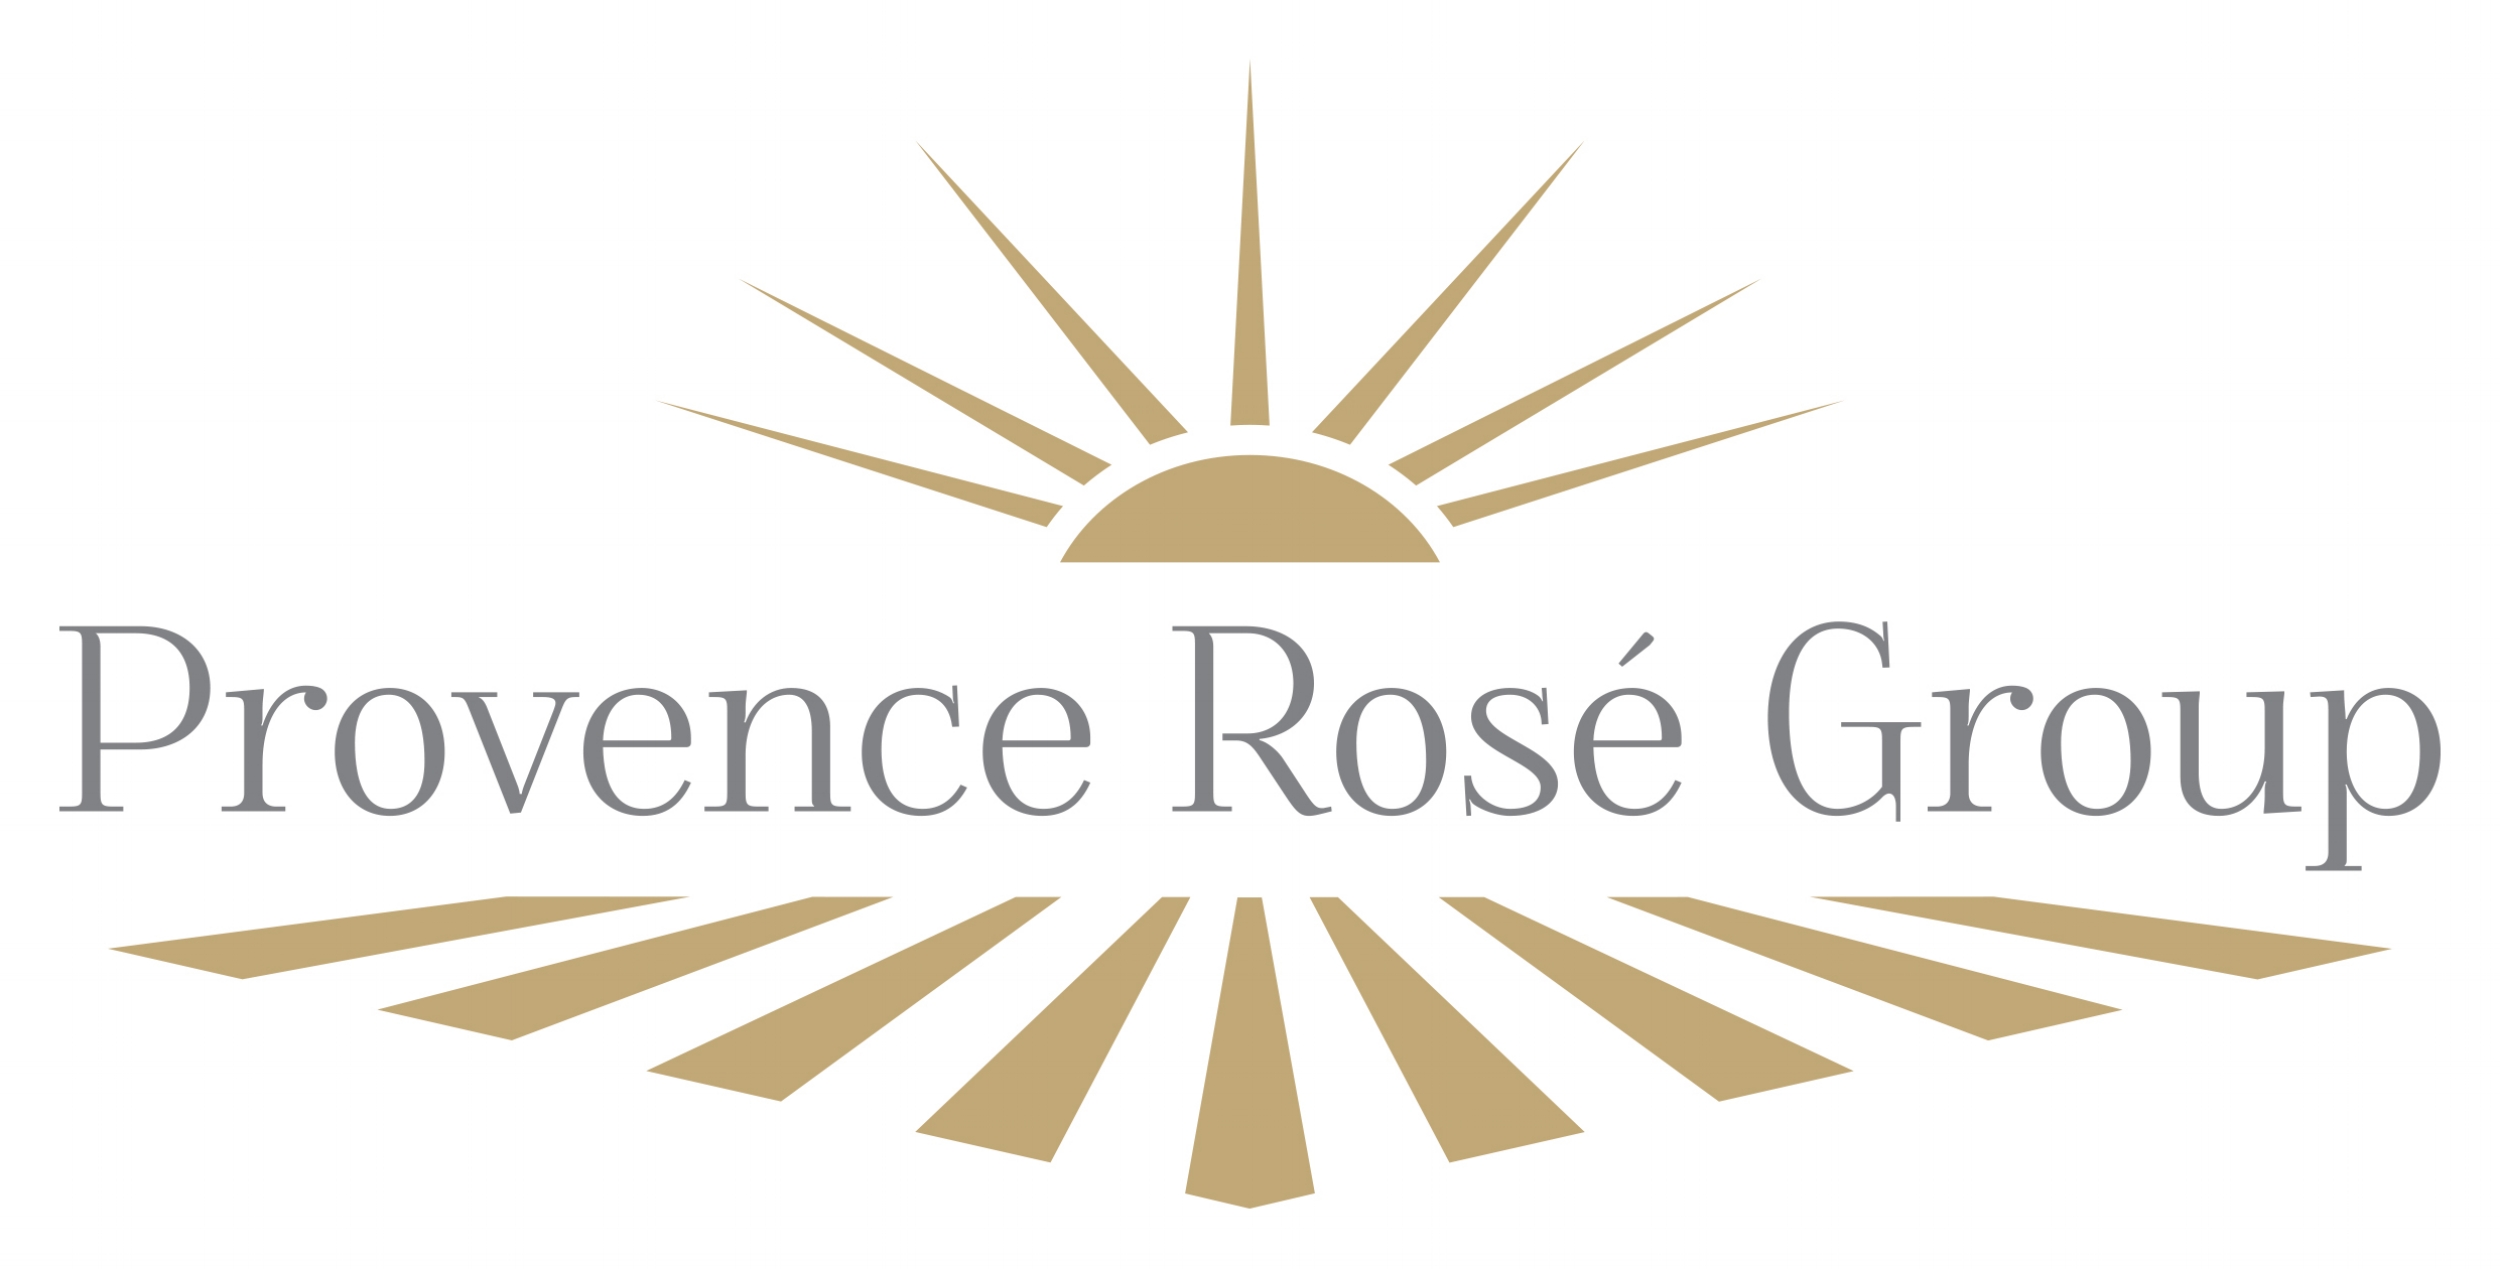 Provence Rose Group